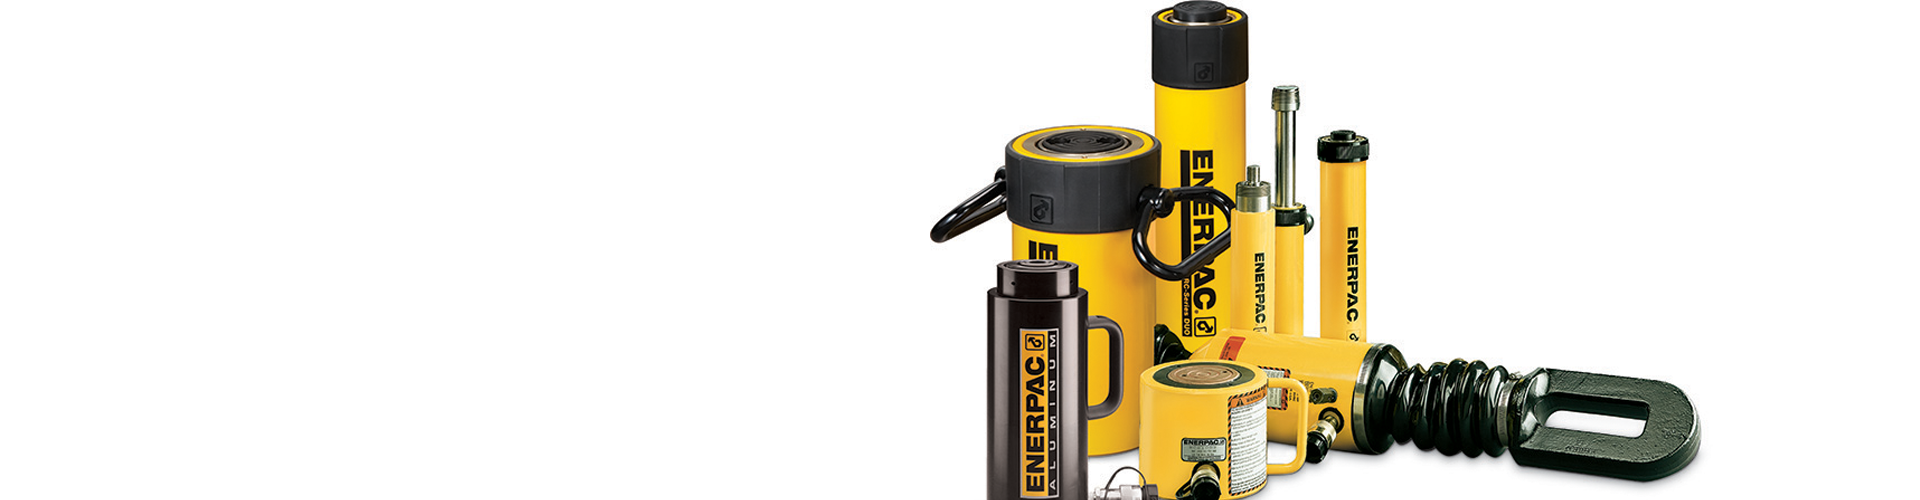 Enerpac Hydraulic Tooling in Stock